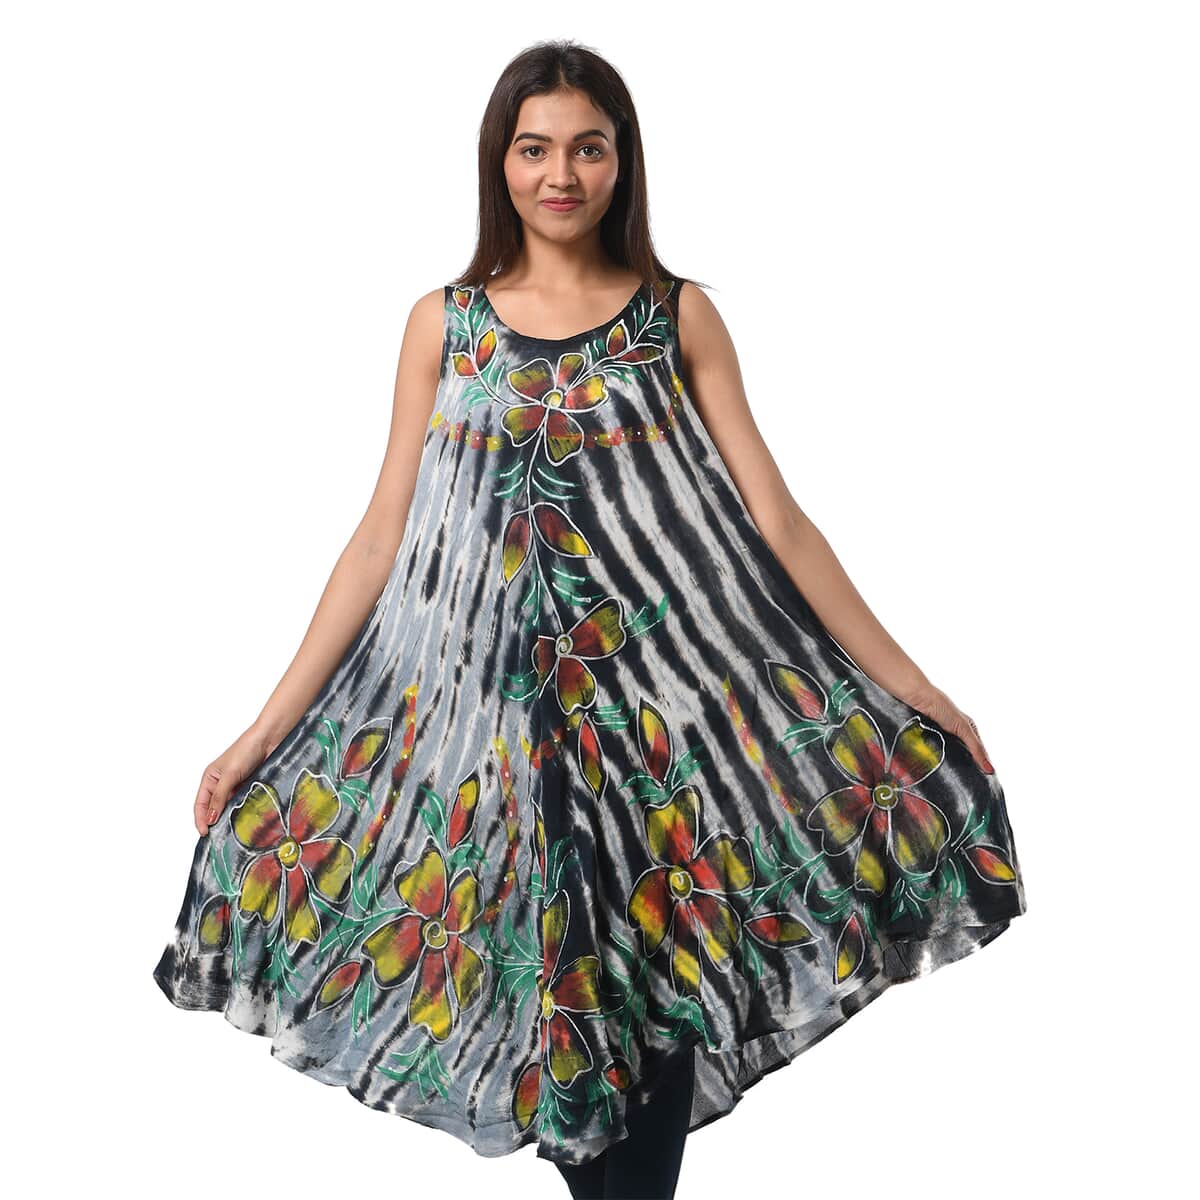 JOVIE Black Stripe Tie Dye with Floral Umbrella Dress - One Size Fits Most image number 0